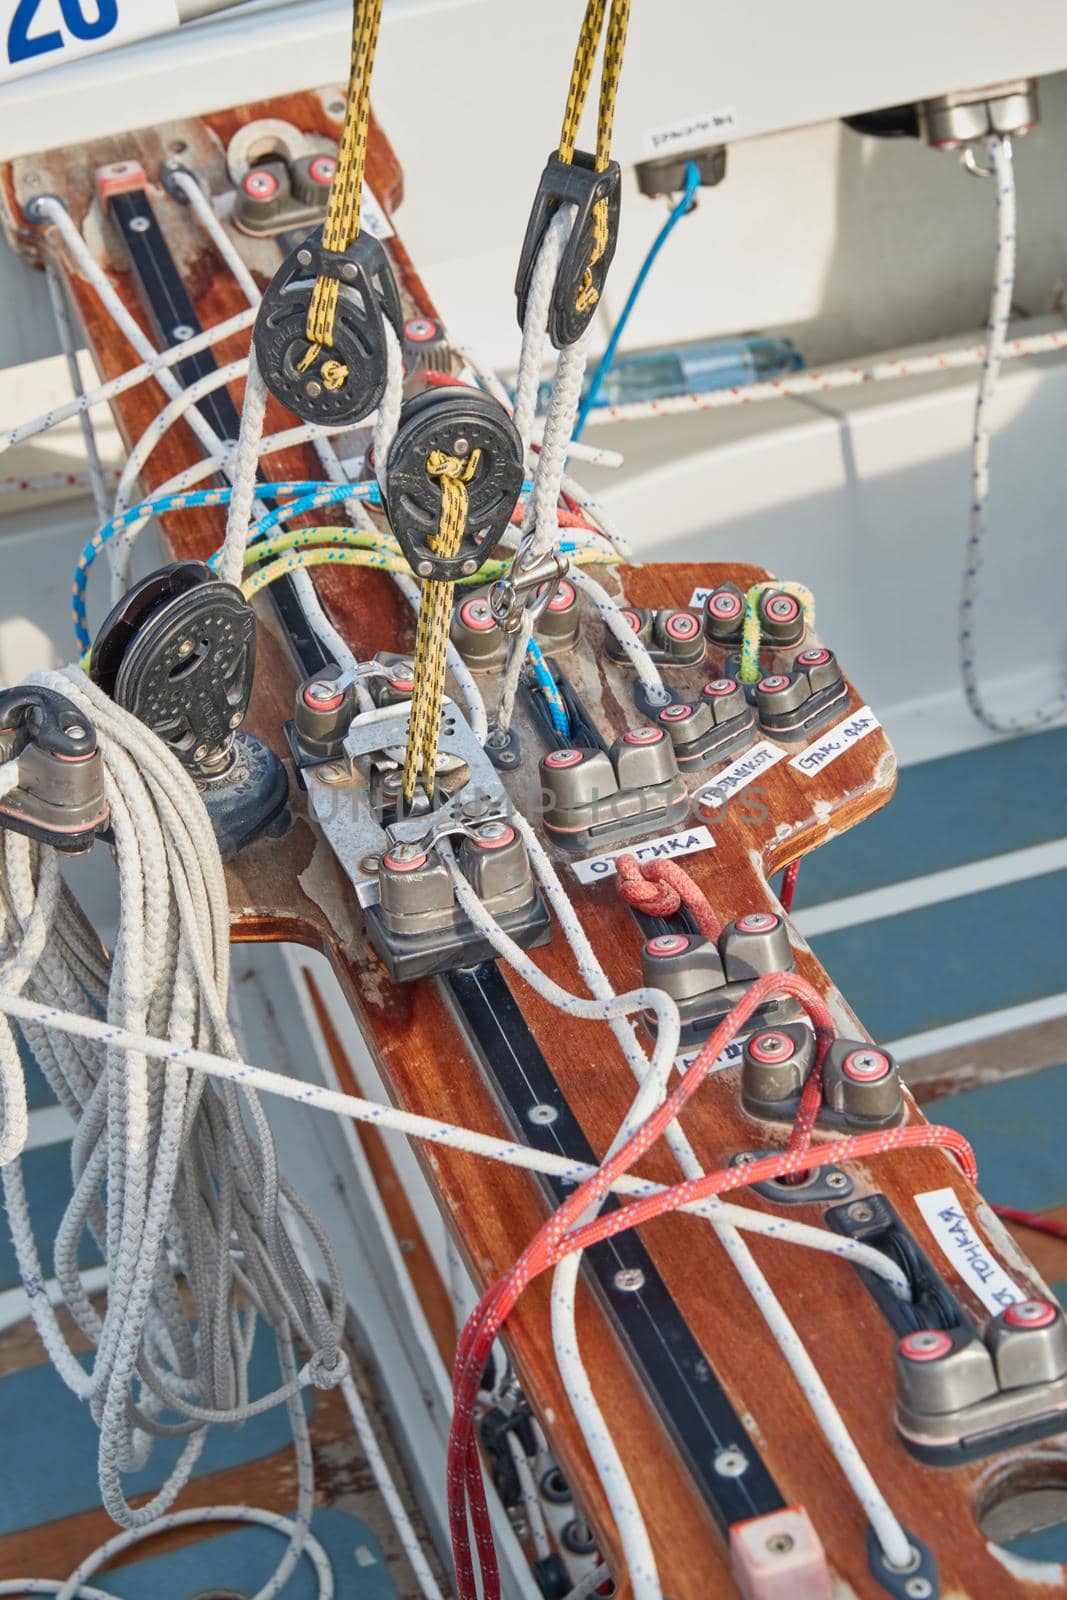 Set of ropes for management of the sailboat of different color, the signature to each rope, rollers, levers, carbines, clamps, the dragon sailboat. High quality photo